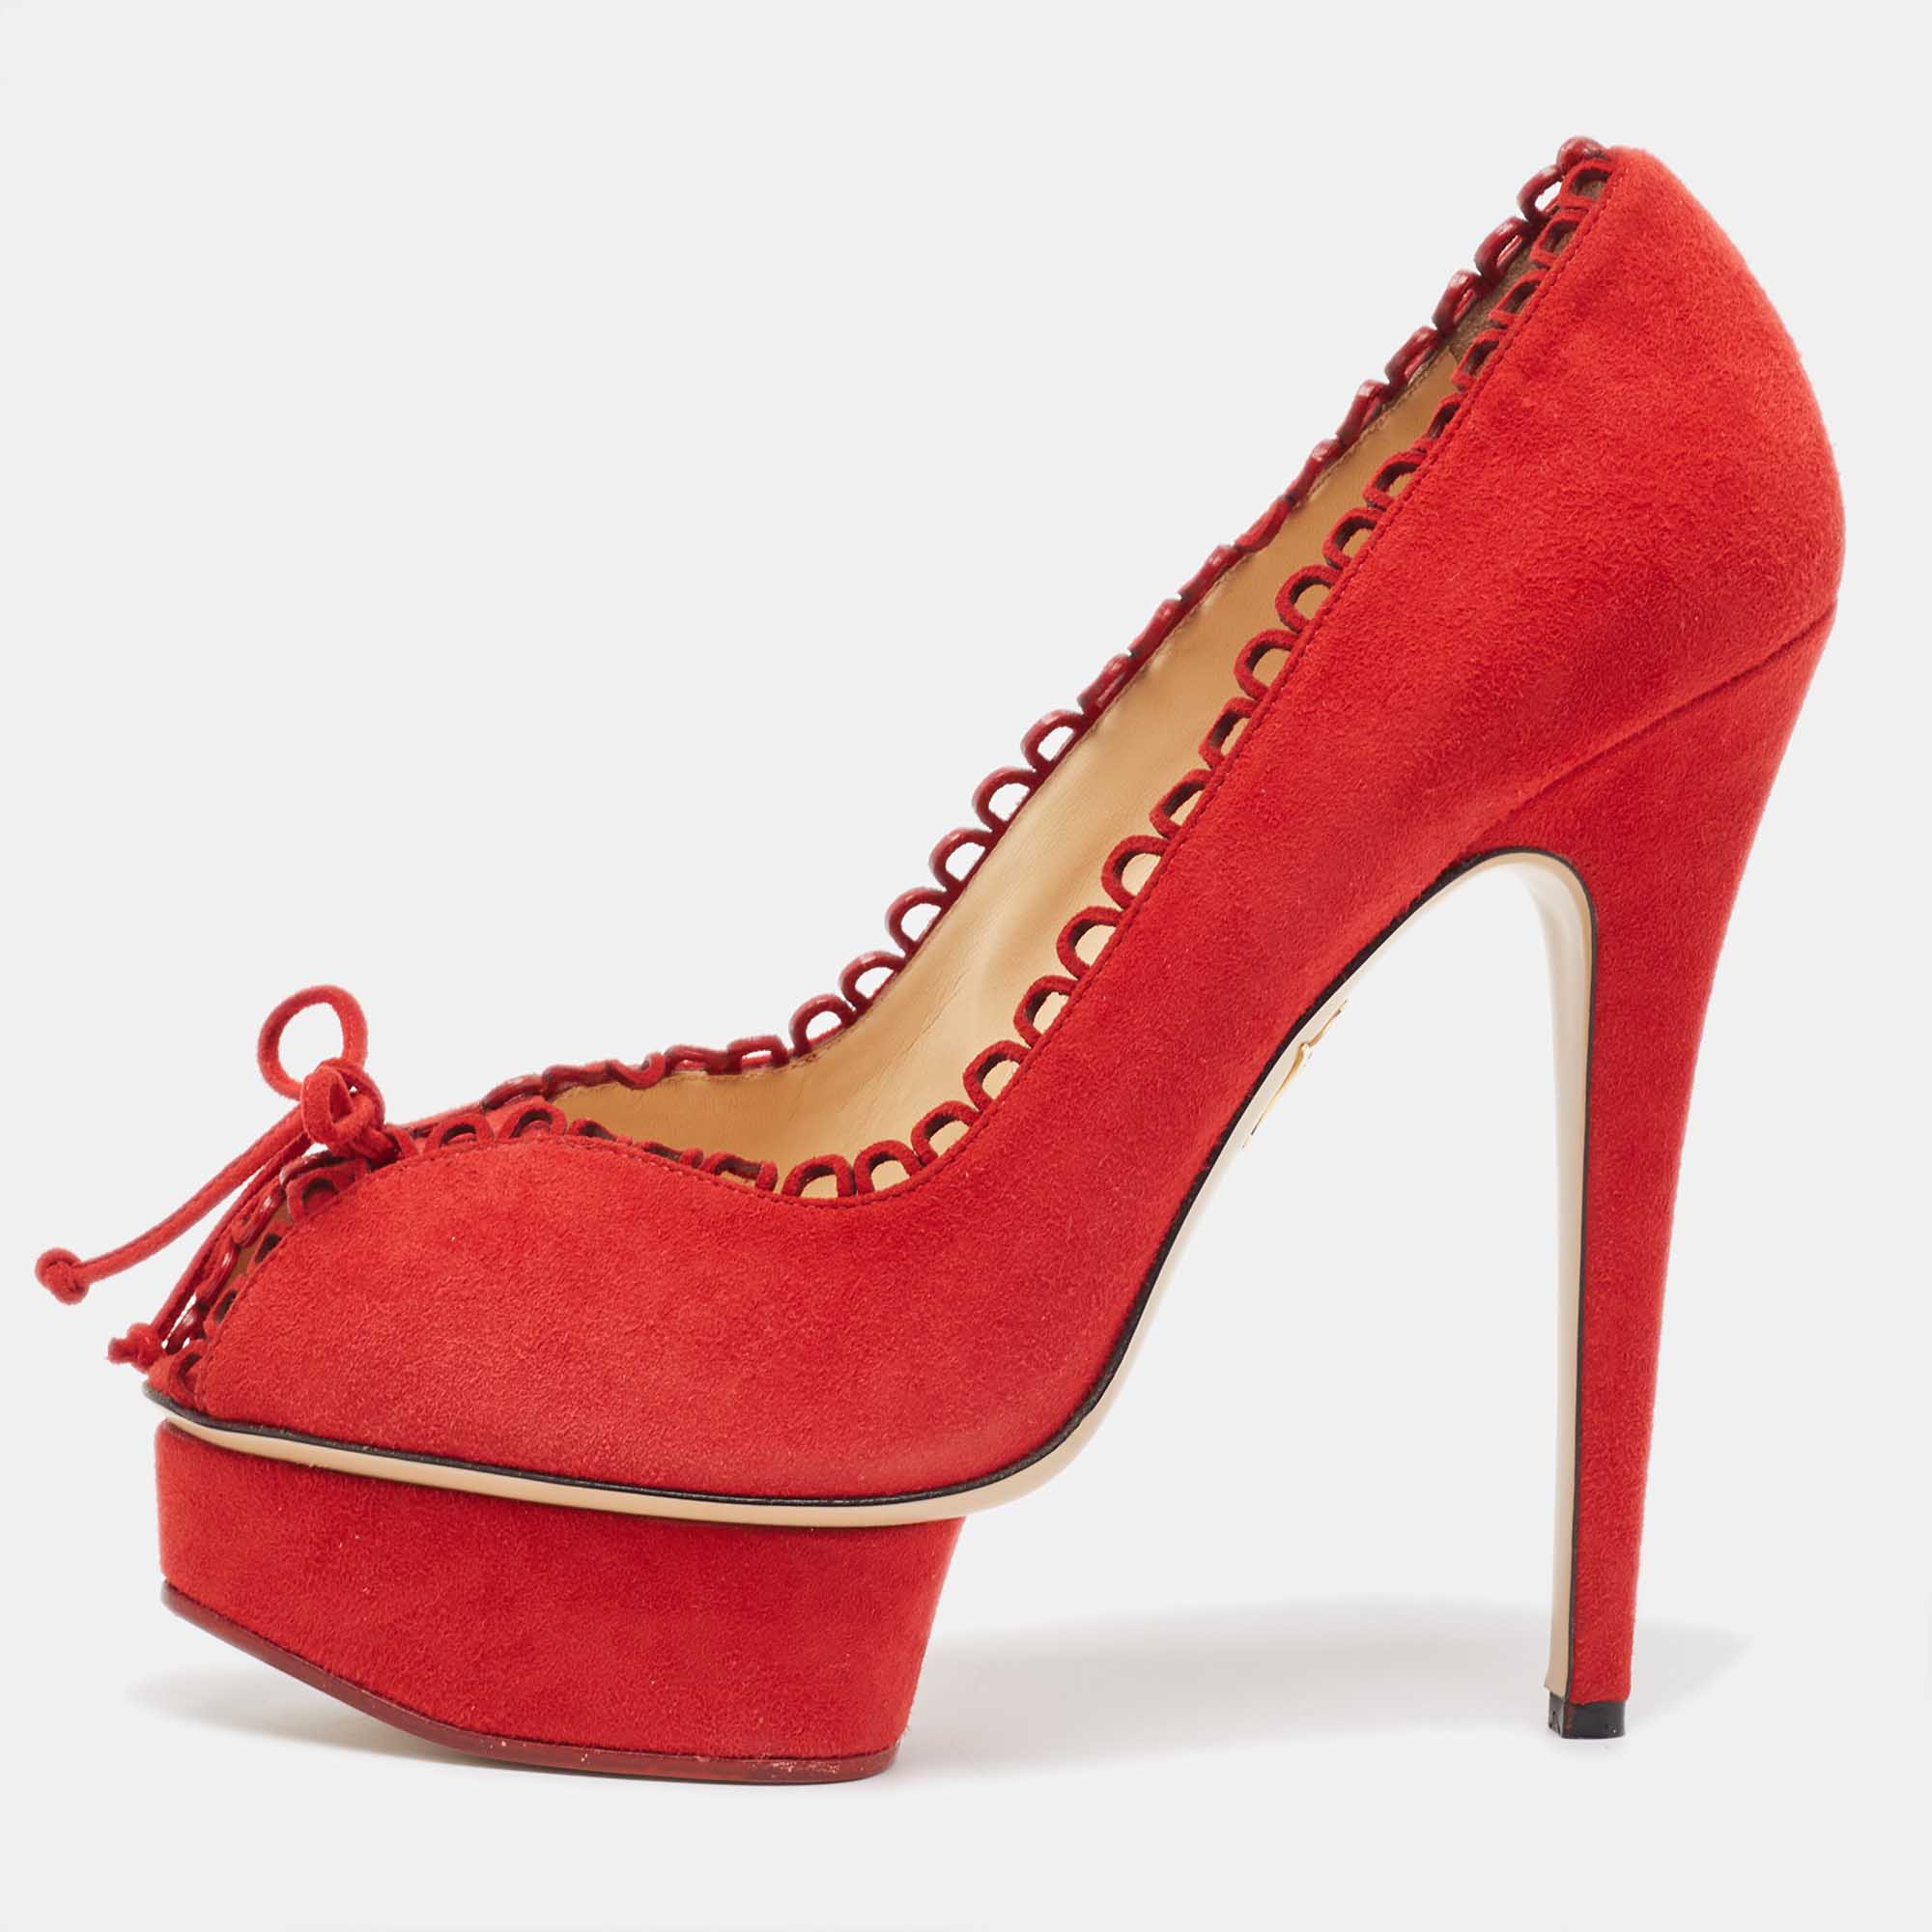 

Charlotte Olympia Red Suede Daphne Scalloped Trim Peep Toe Platform Pumps Size